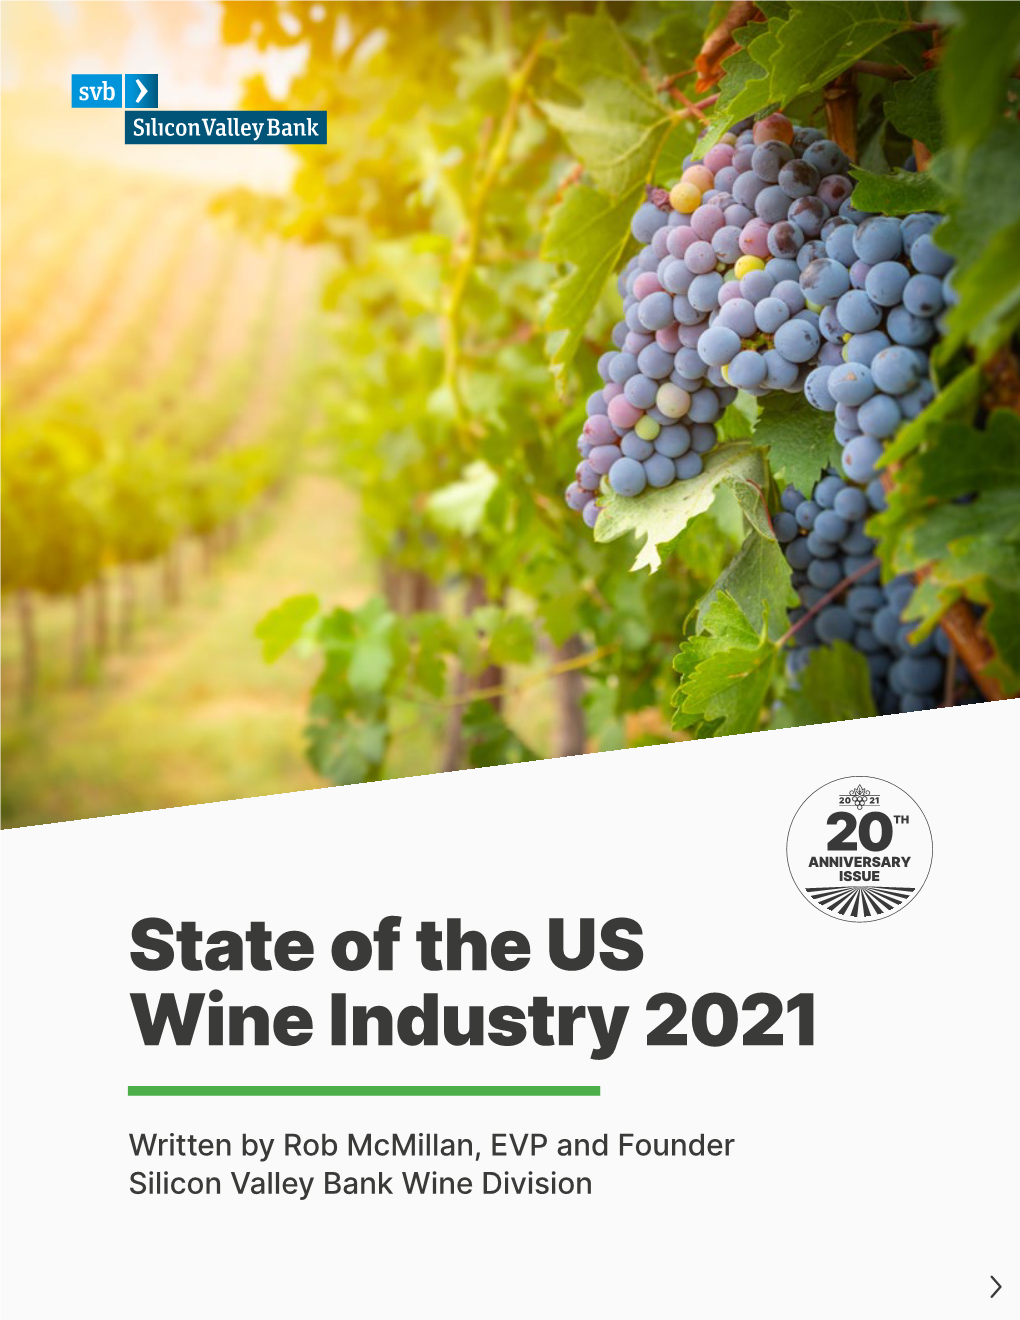 State of the US Wine Industry 2021